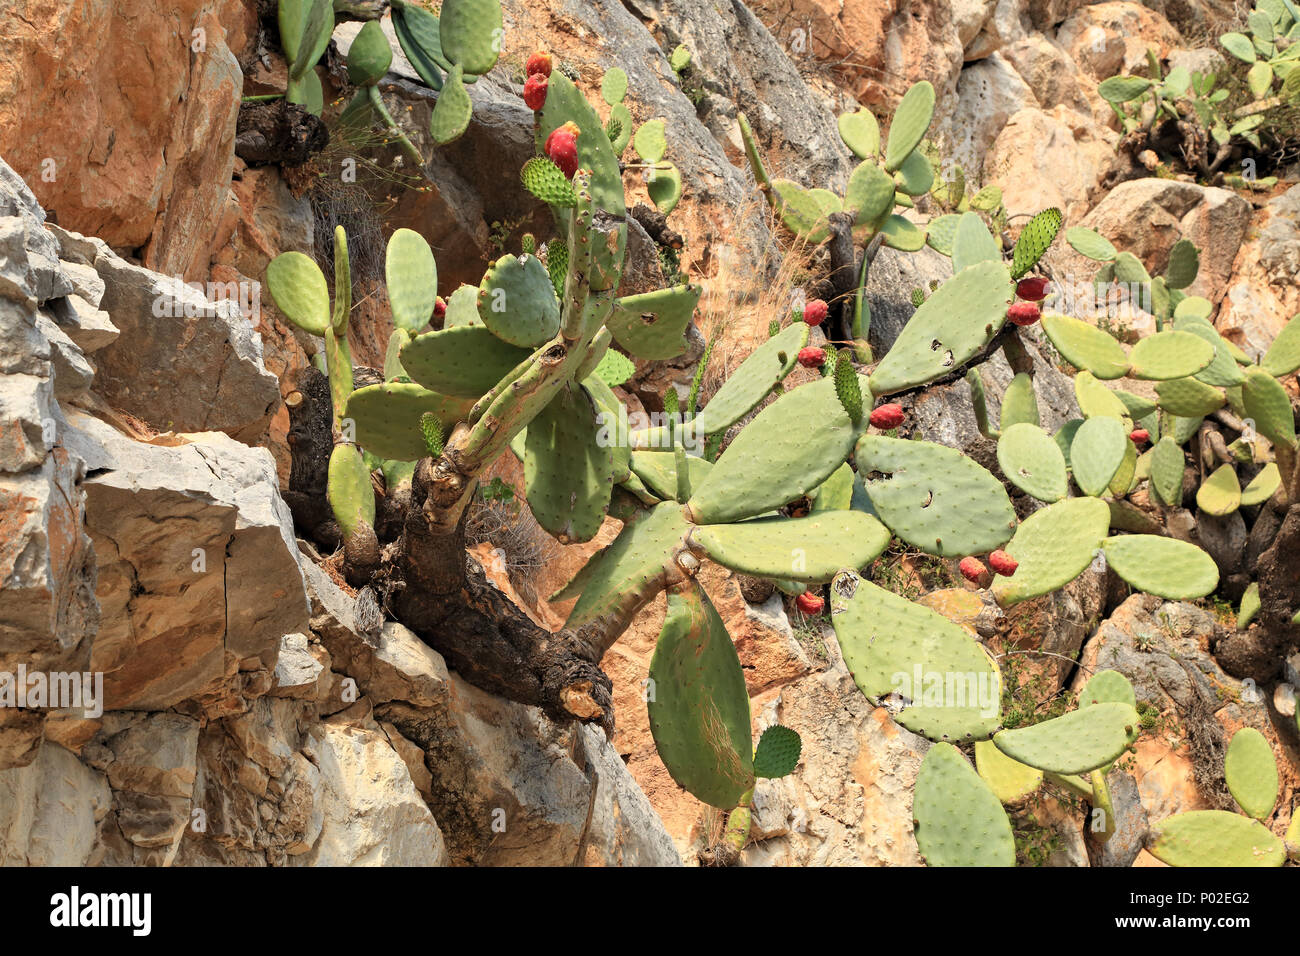 Opuntia ficus-indica (Indian fig) cactus with fruits Stock Photo